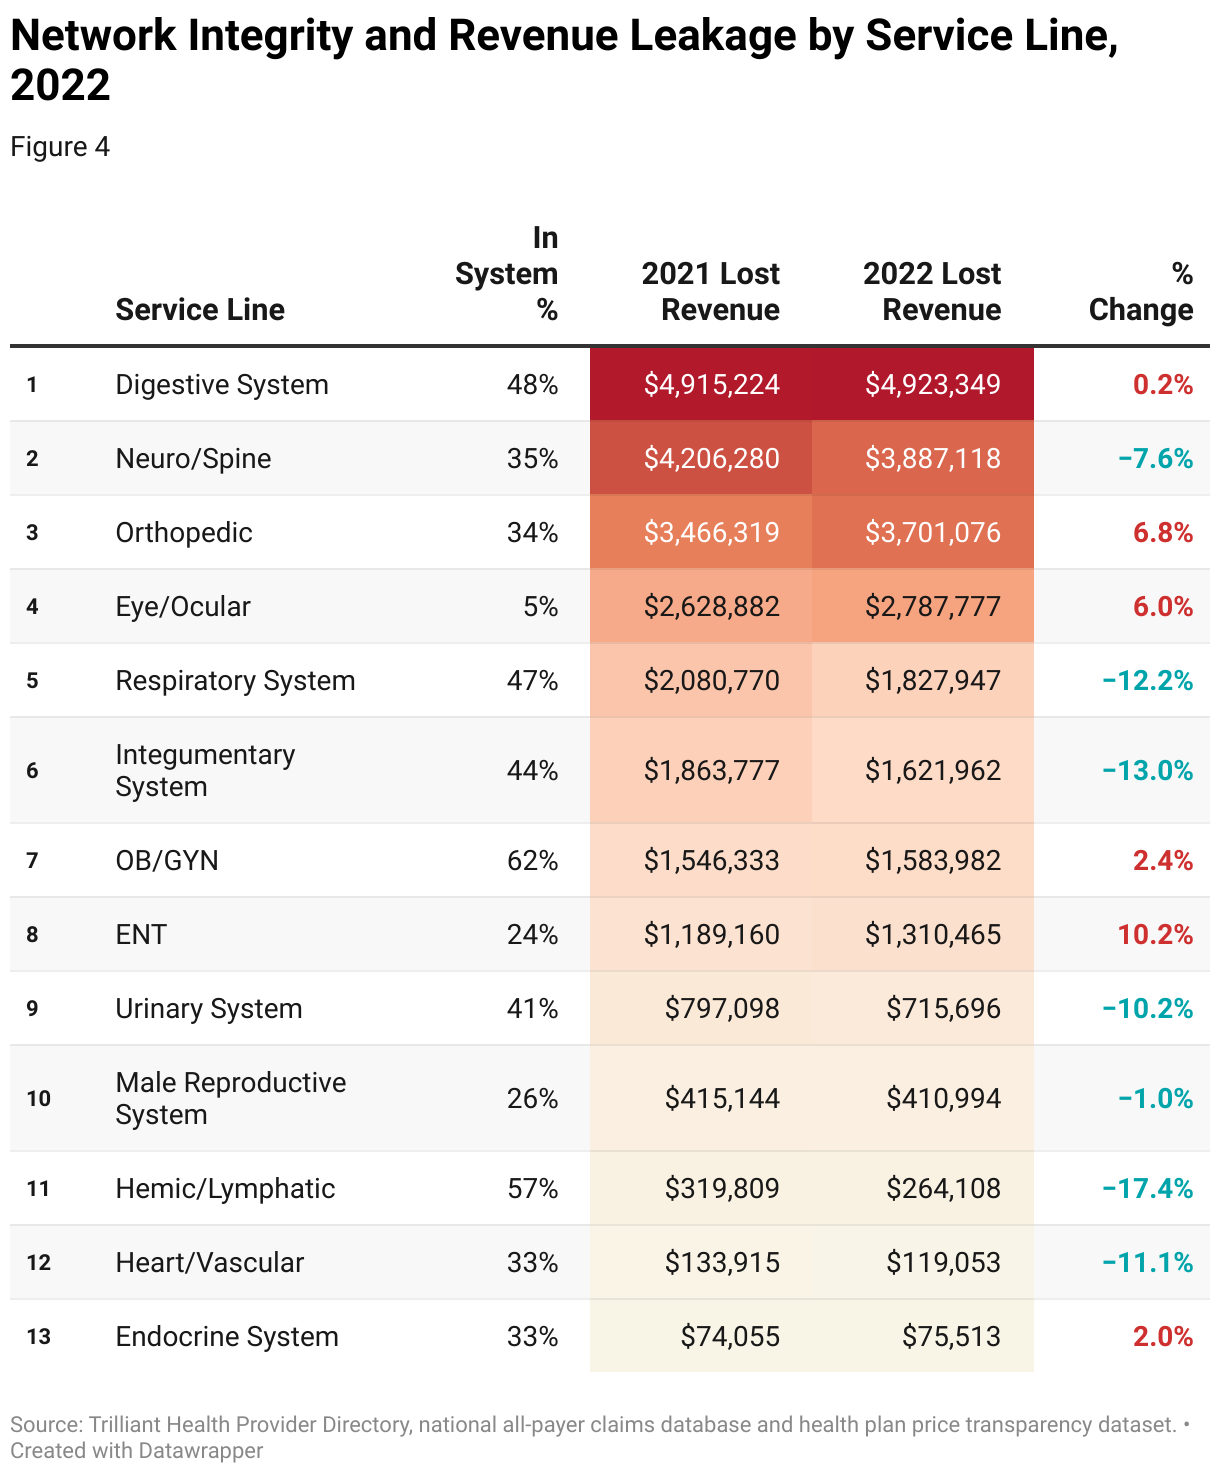 A table shows the network integrity and lost revenue for an example health system’s service lines. The service line with the highest lost revenue is Digestive System, with $4.9 million in 2022.